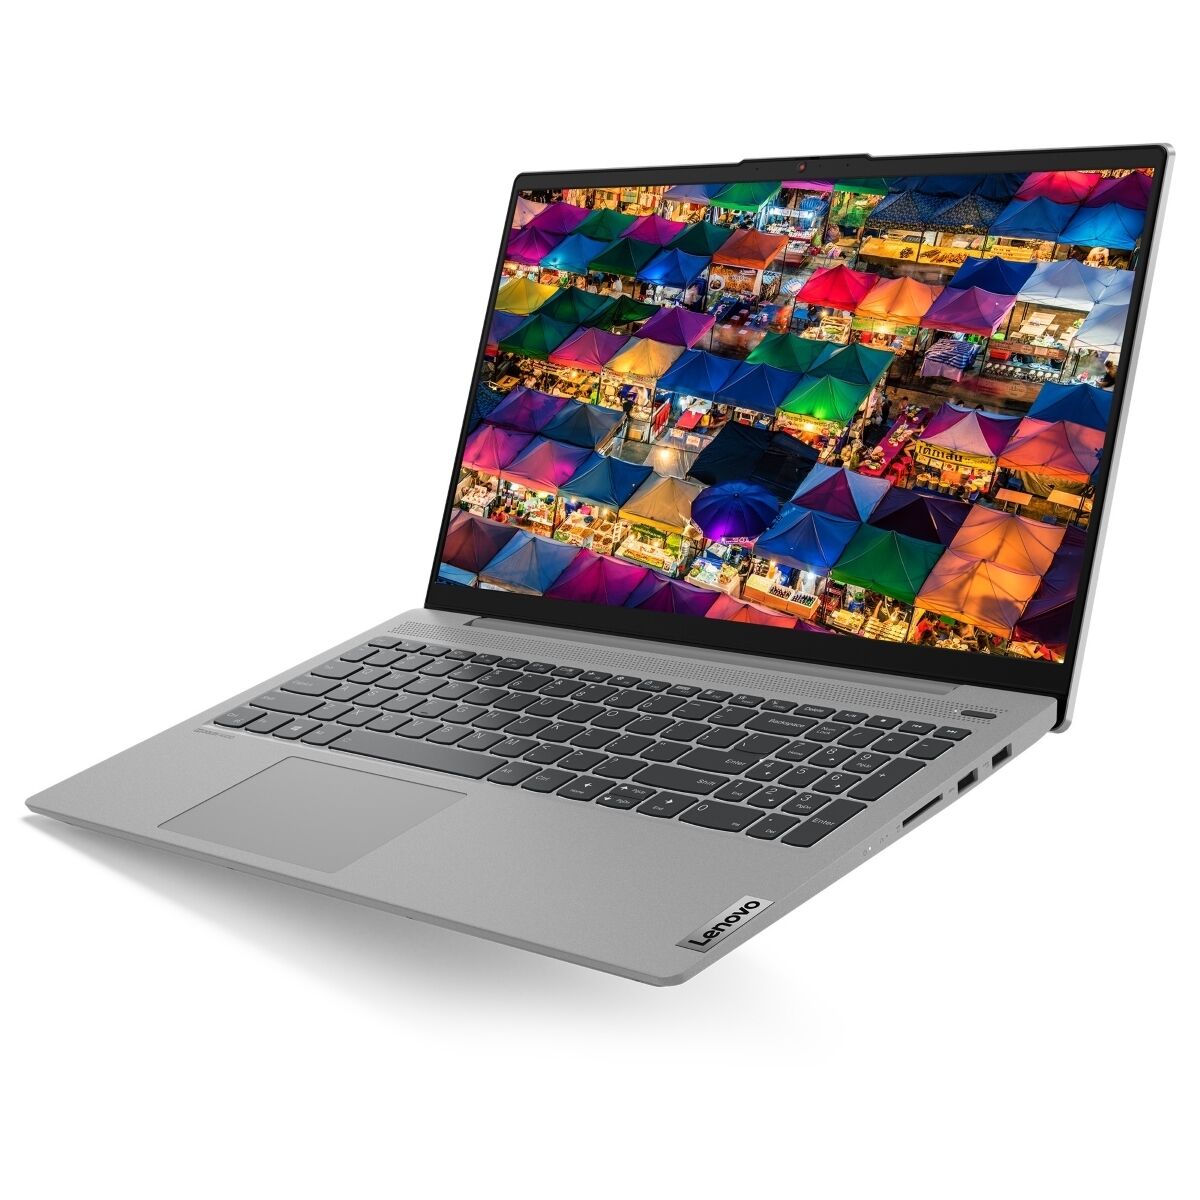 Lenovo IdeaPad 5 15ALC05 in review: 15.6-inch laptop convinces and